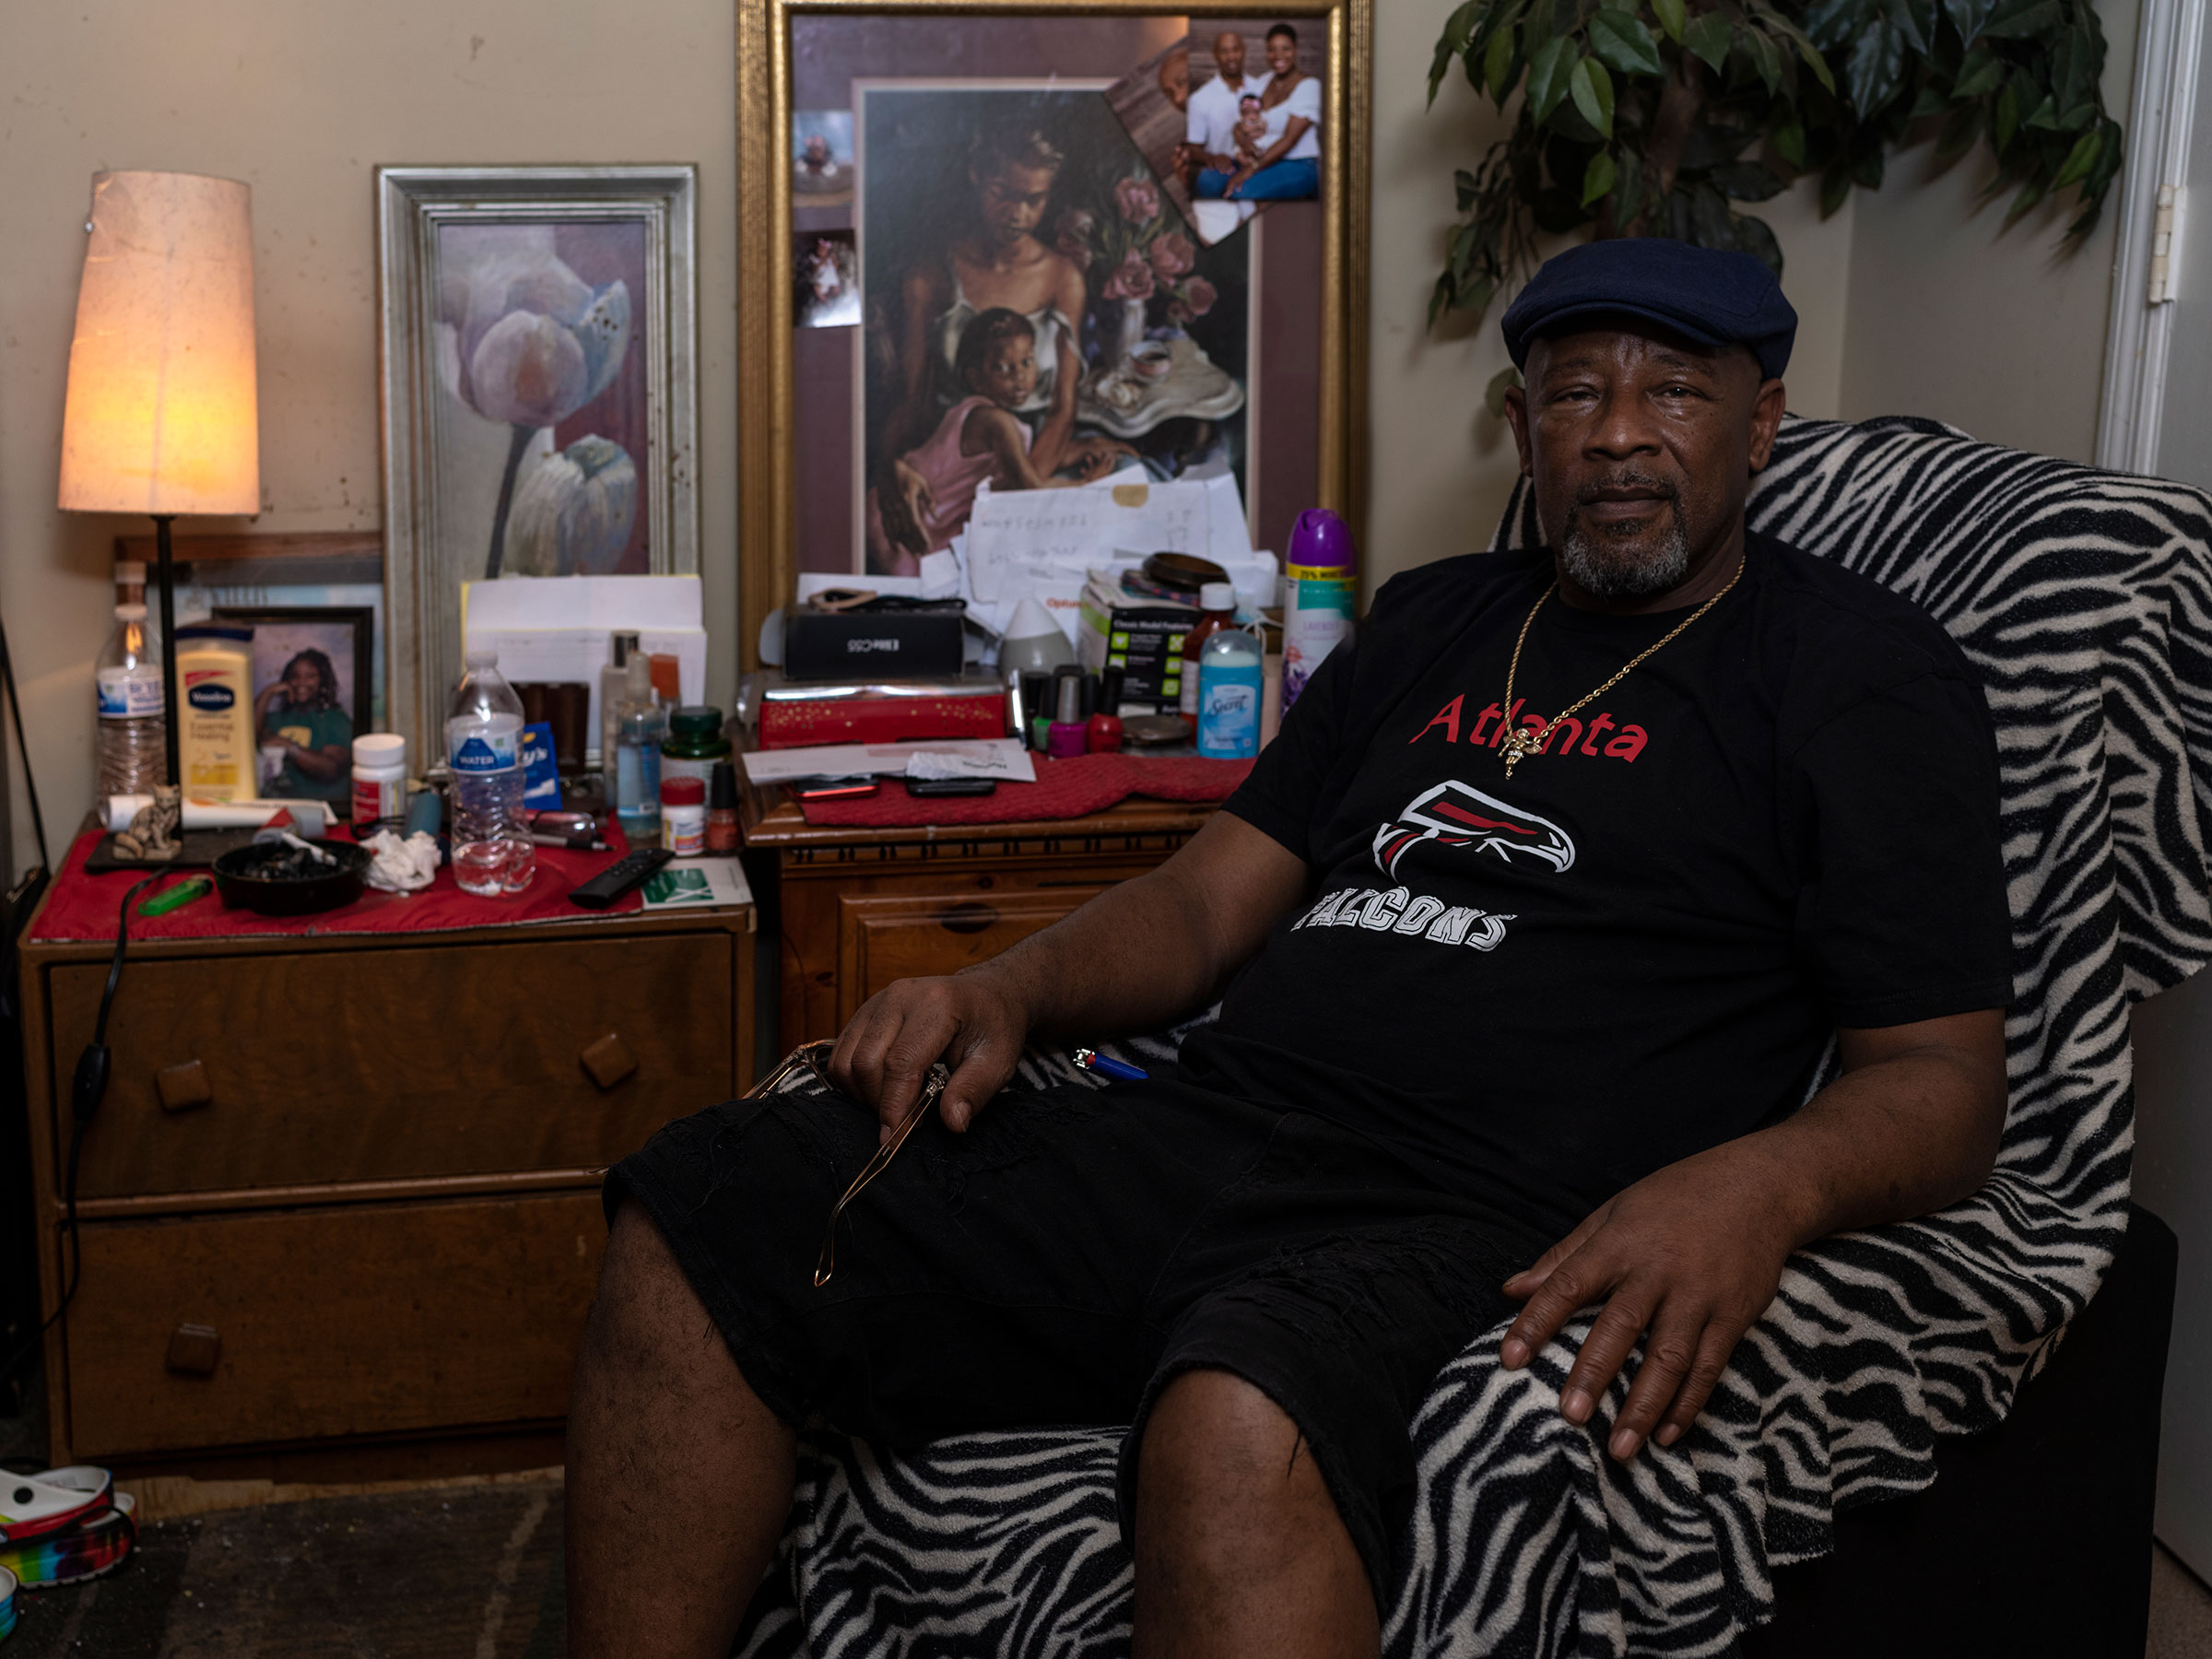 Keith Bowens poses for a portrait in his home in Lithonia, Ga. on Nov. 6. (Gillian Laub for TIME)